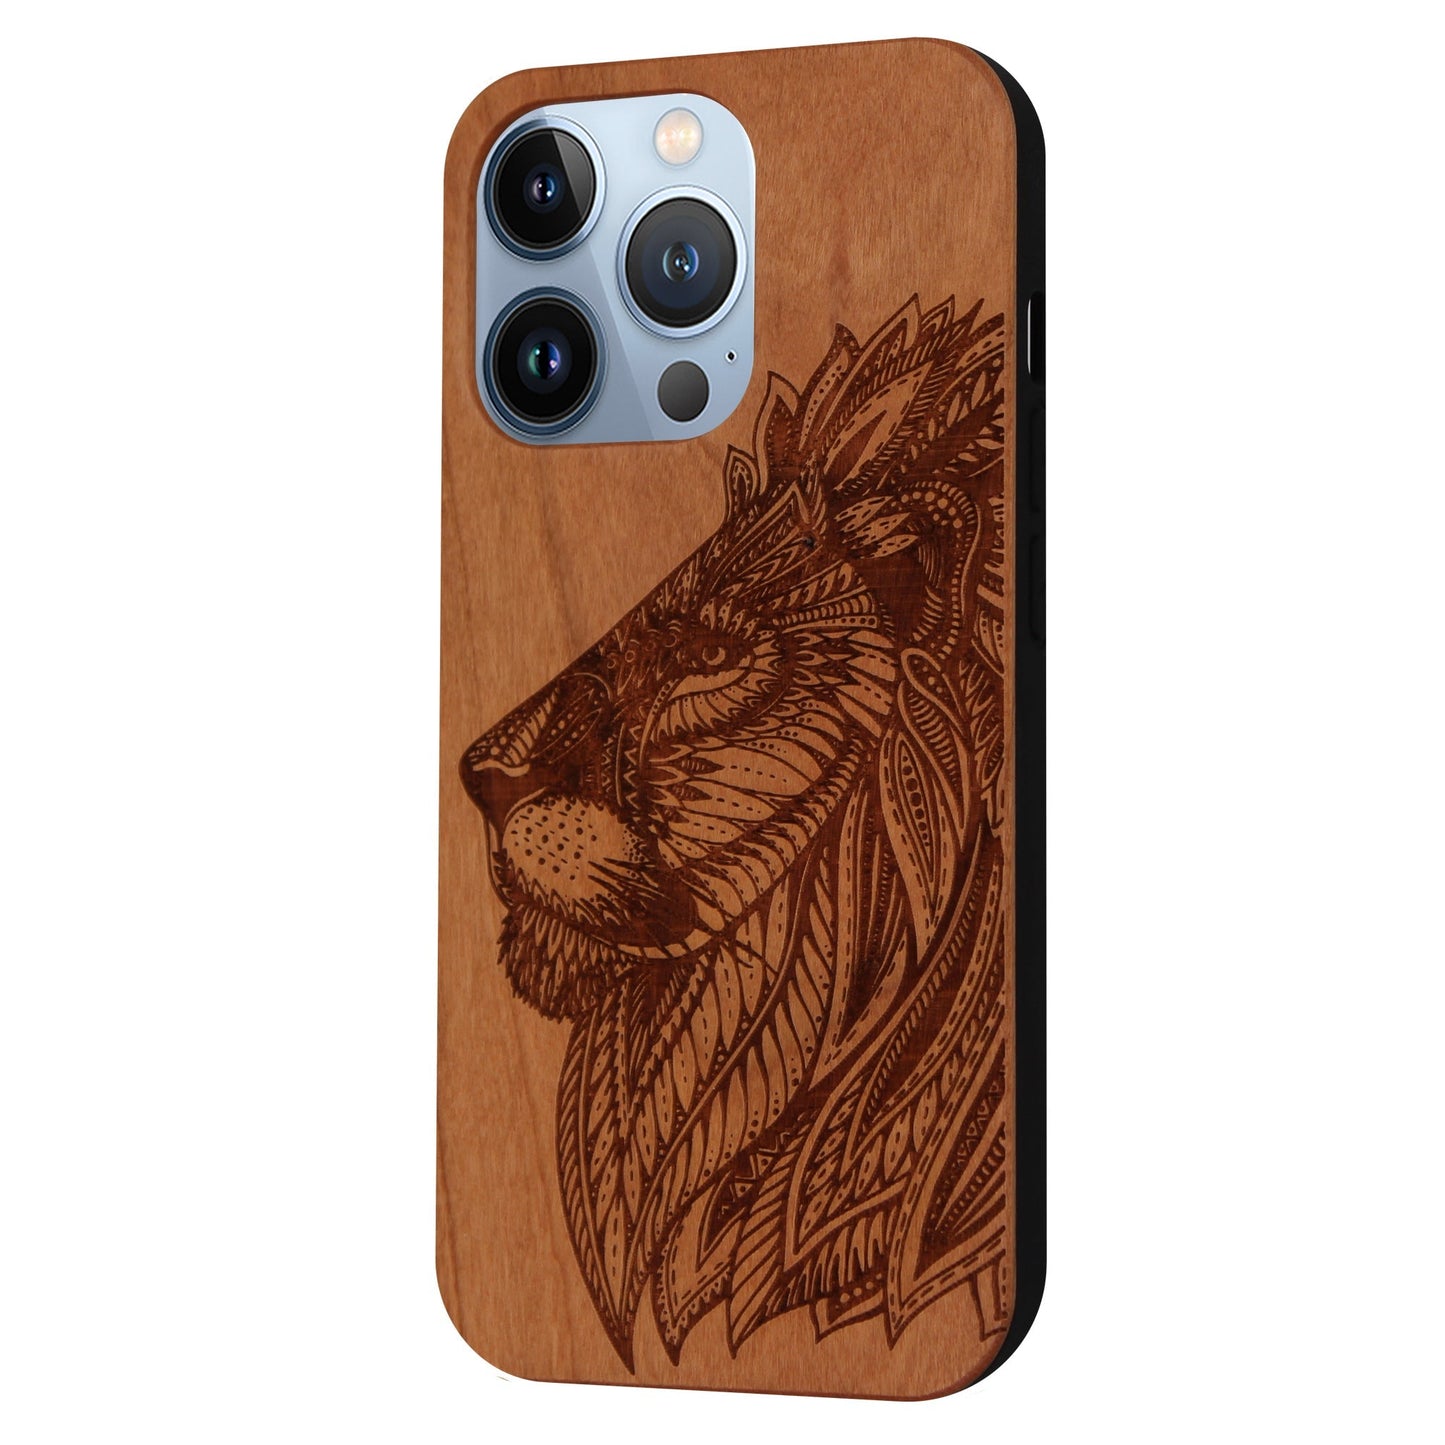 Eden Lion case made of cherry wood for iPhone 13 Pro